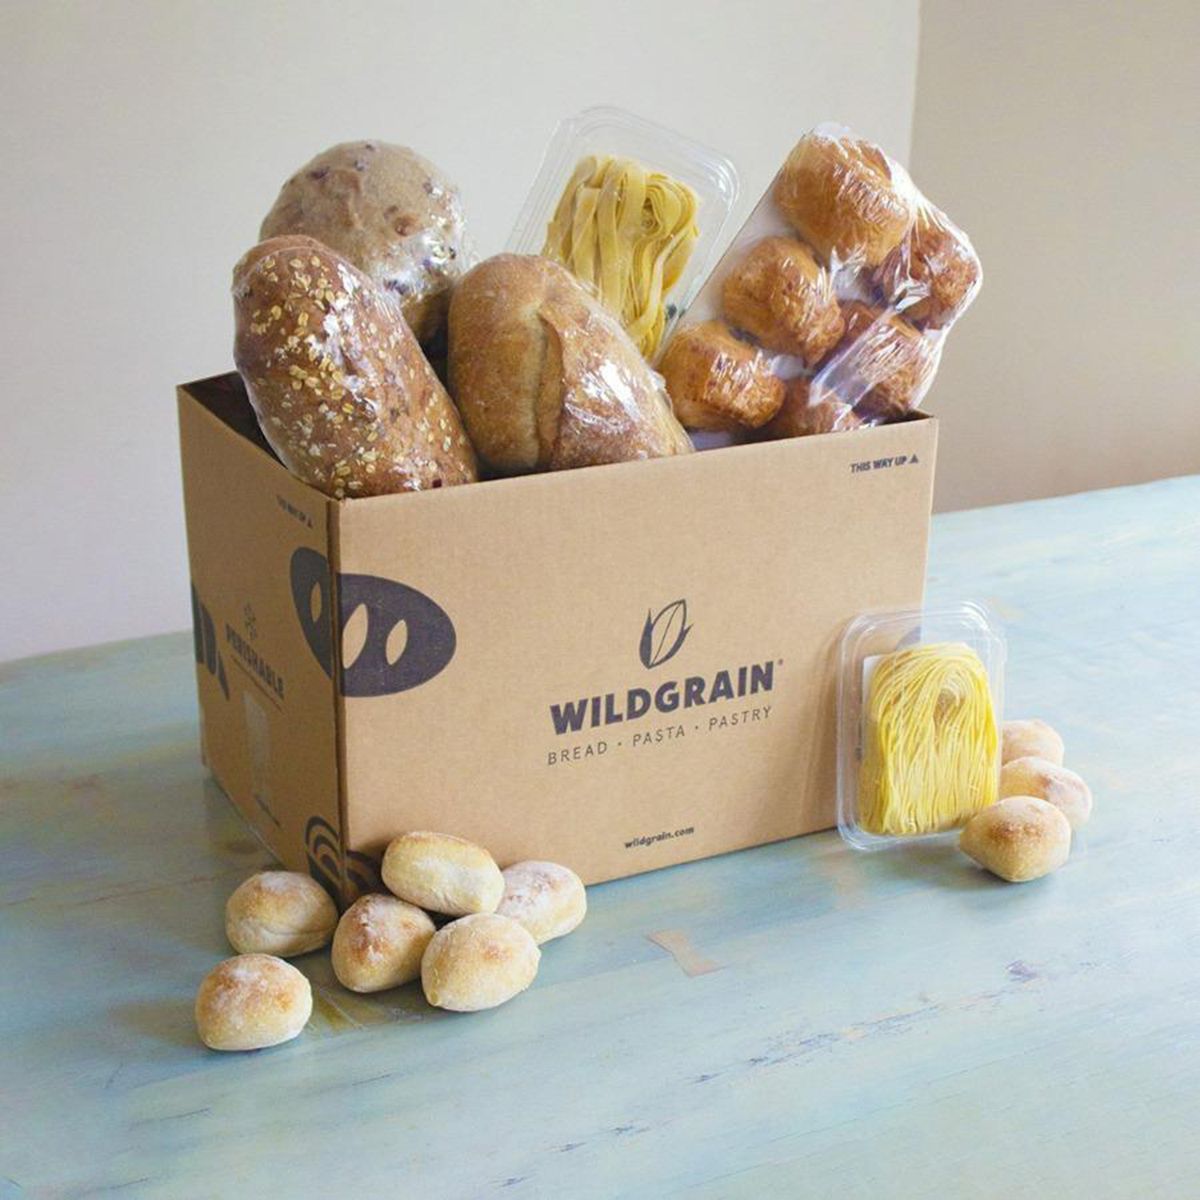 Bread and Pasta Box with Free Sourdough Loaf